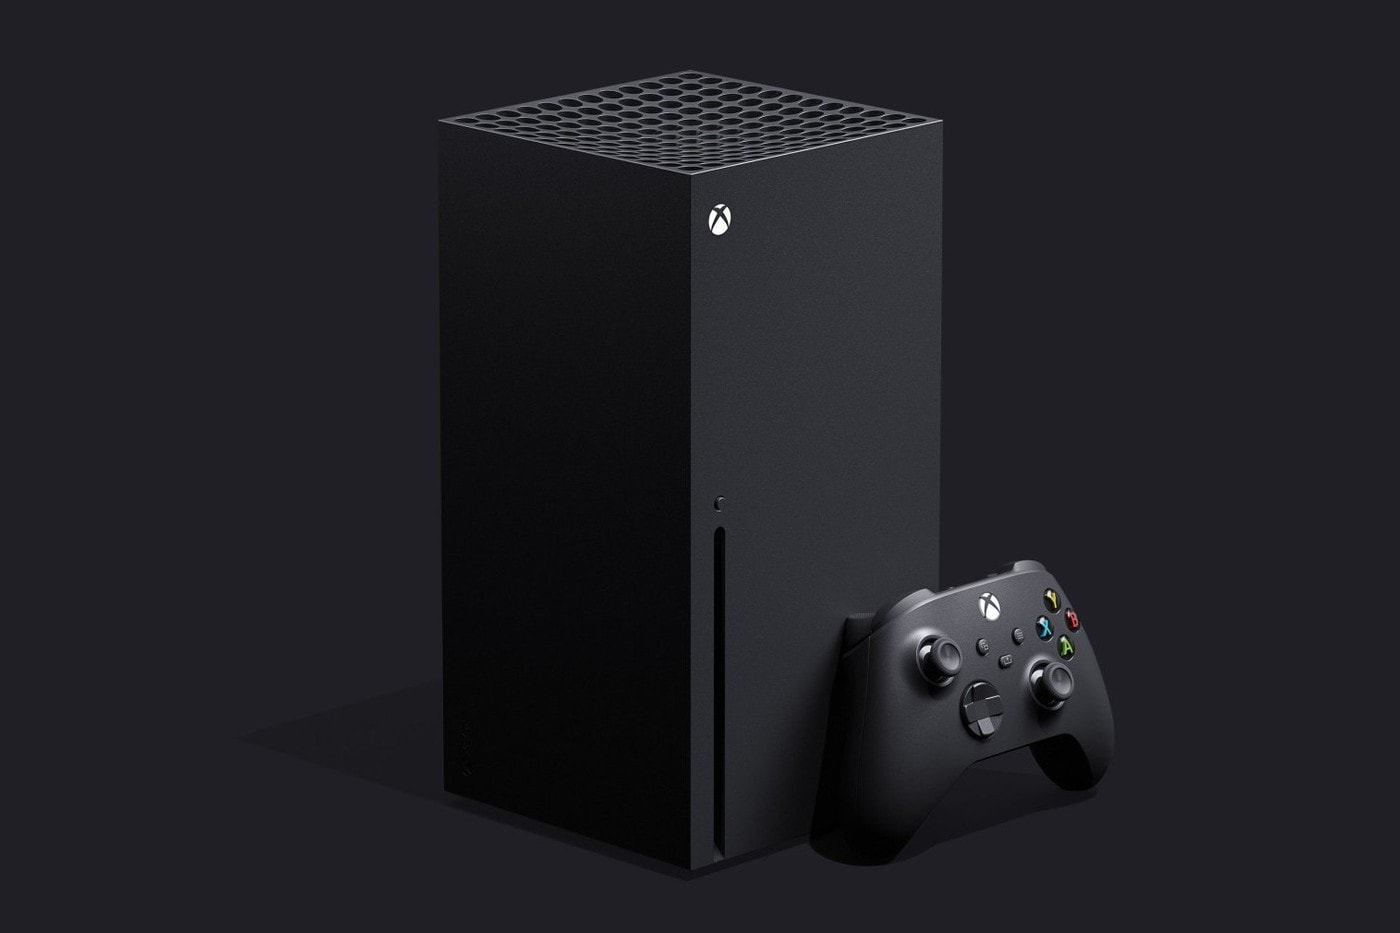 Microsoft Xbox Series X Full Specs Released Game Consoles Devices News Tech Update Power 8x Zen 2 Cores 1TB Custom 4K UHD Blu-ray Drive